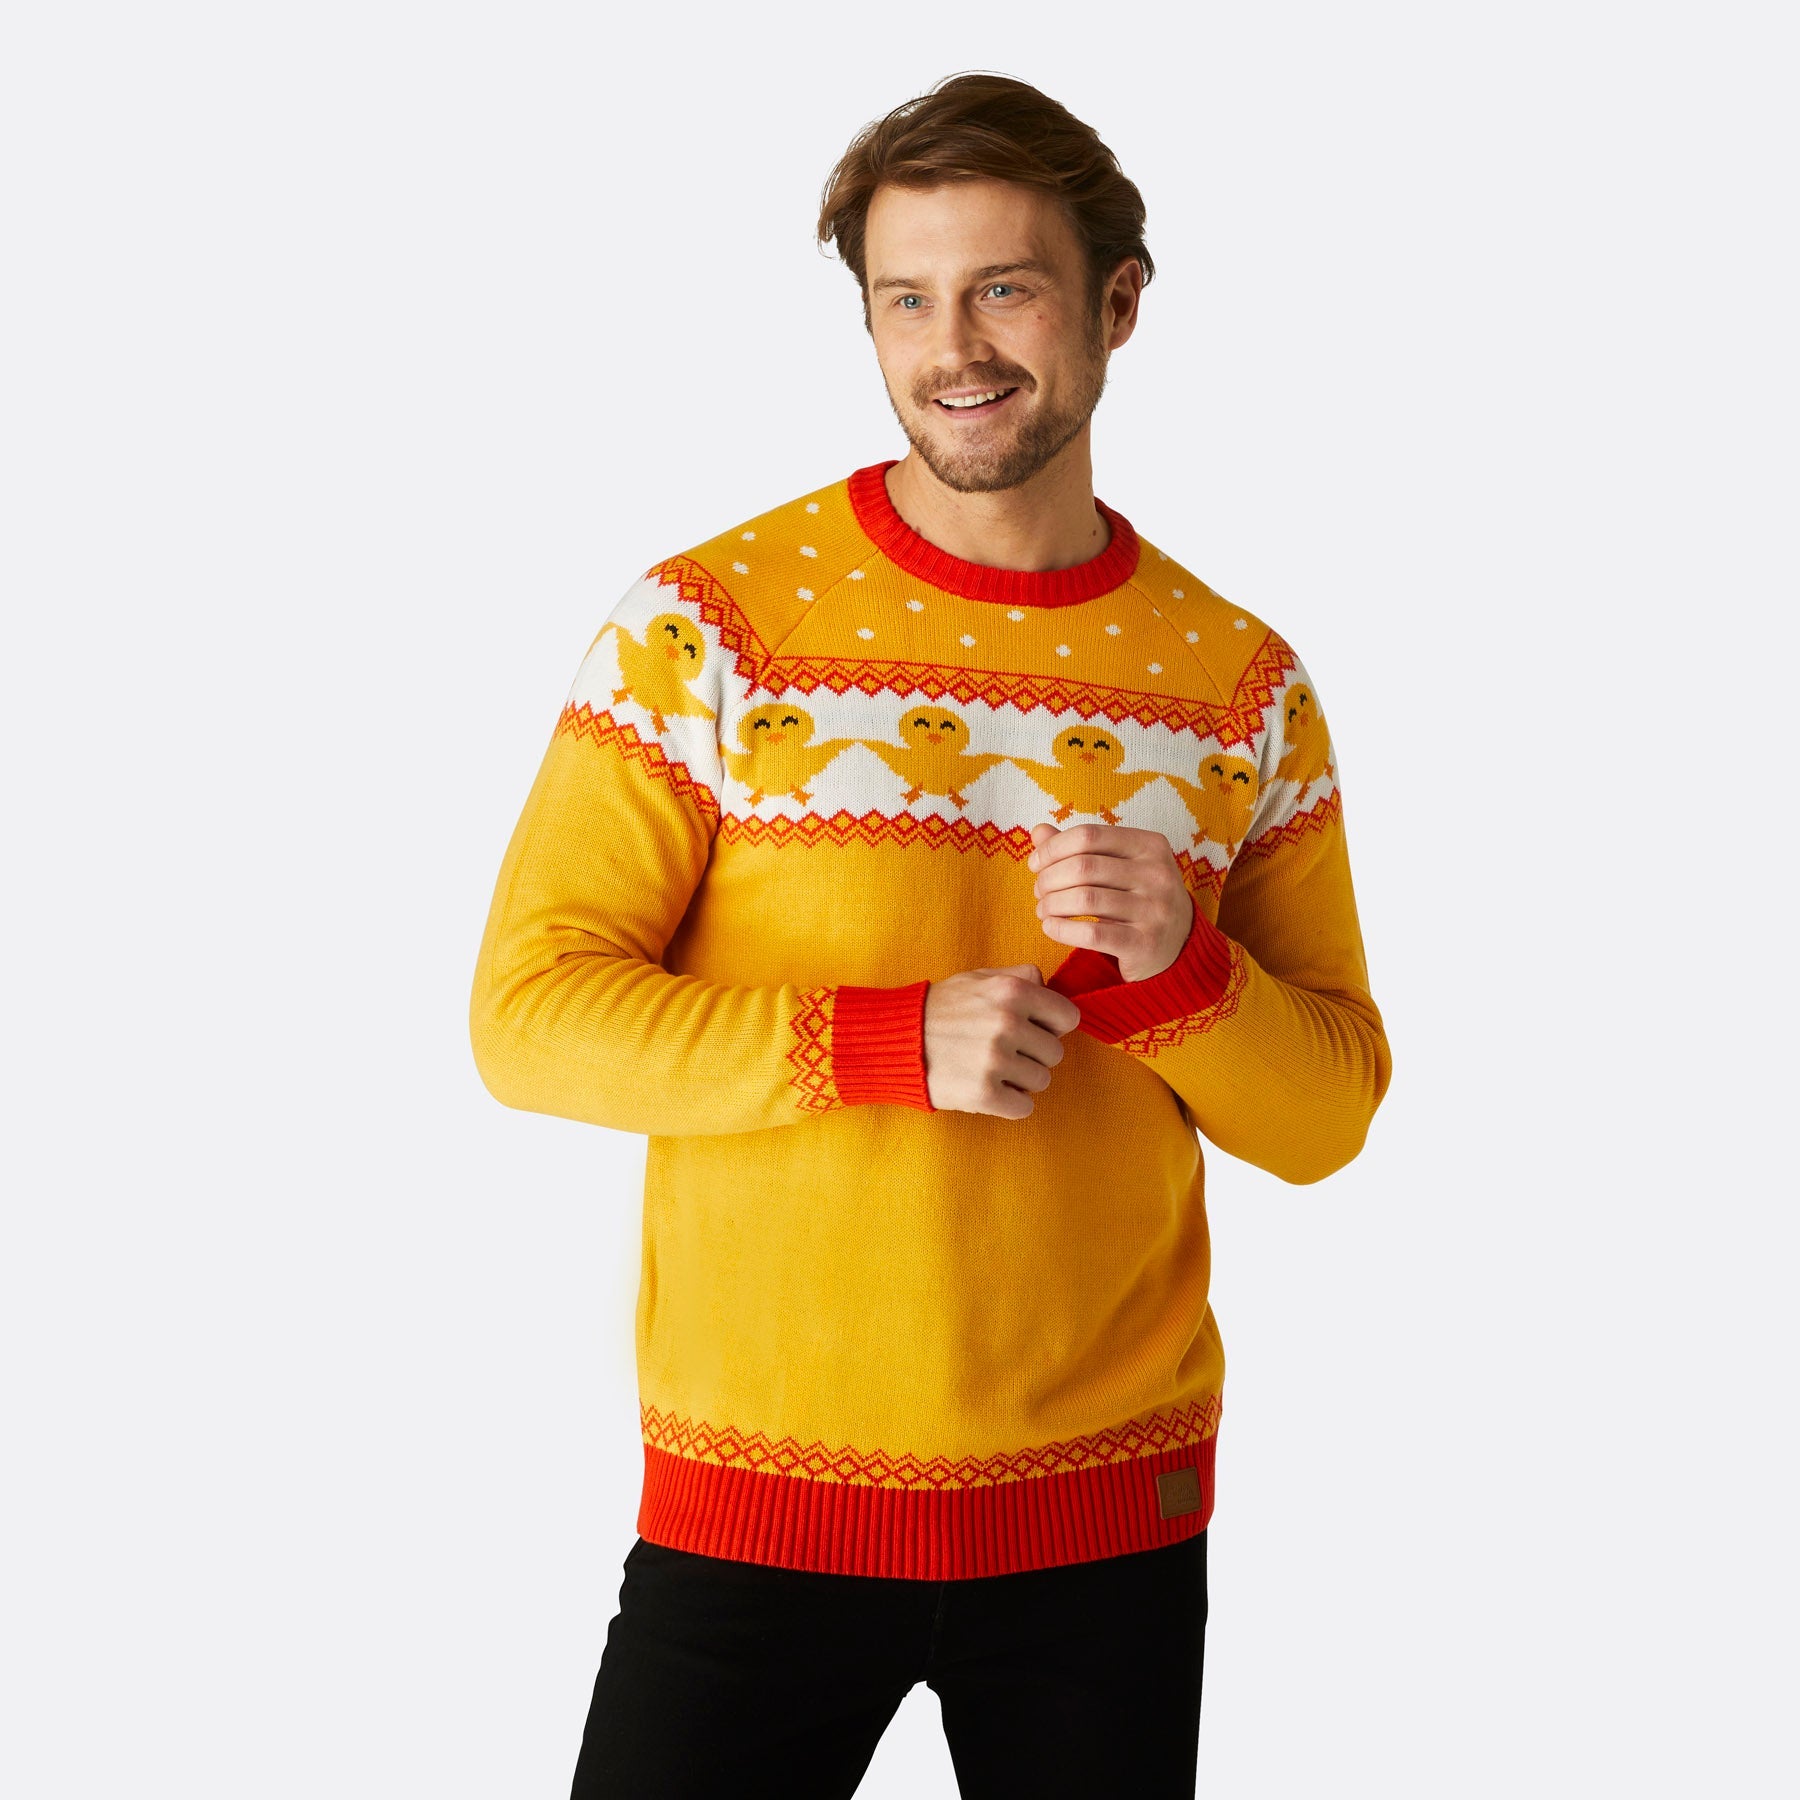 Mens Yellow Easter Sweater - Europe's largest selection